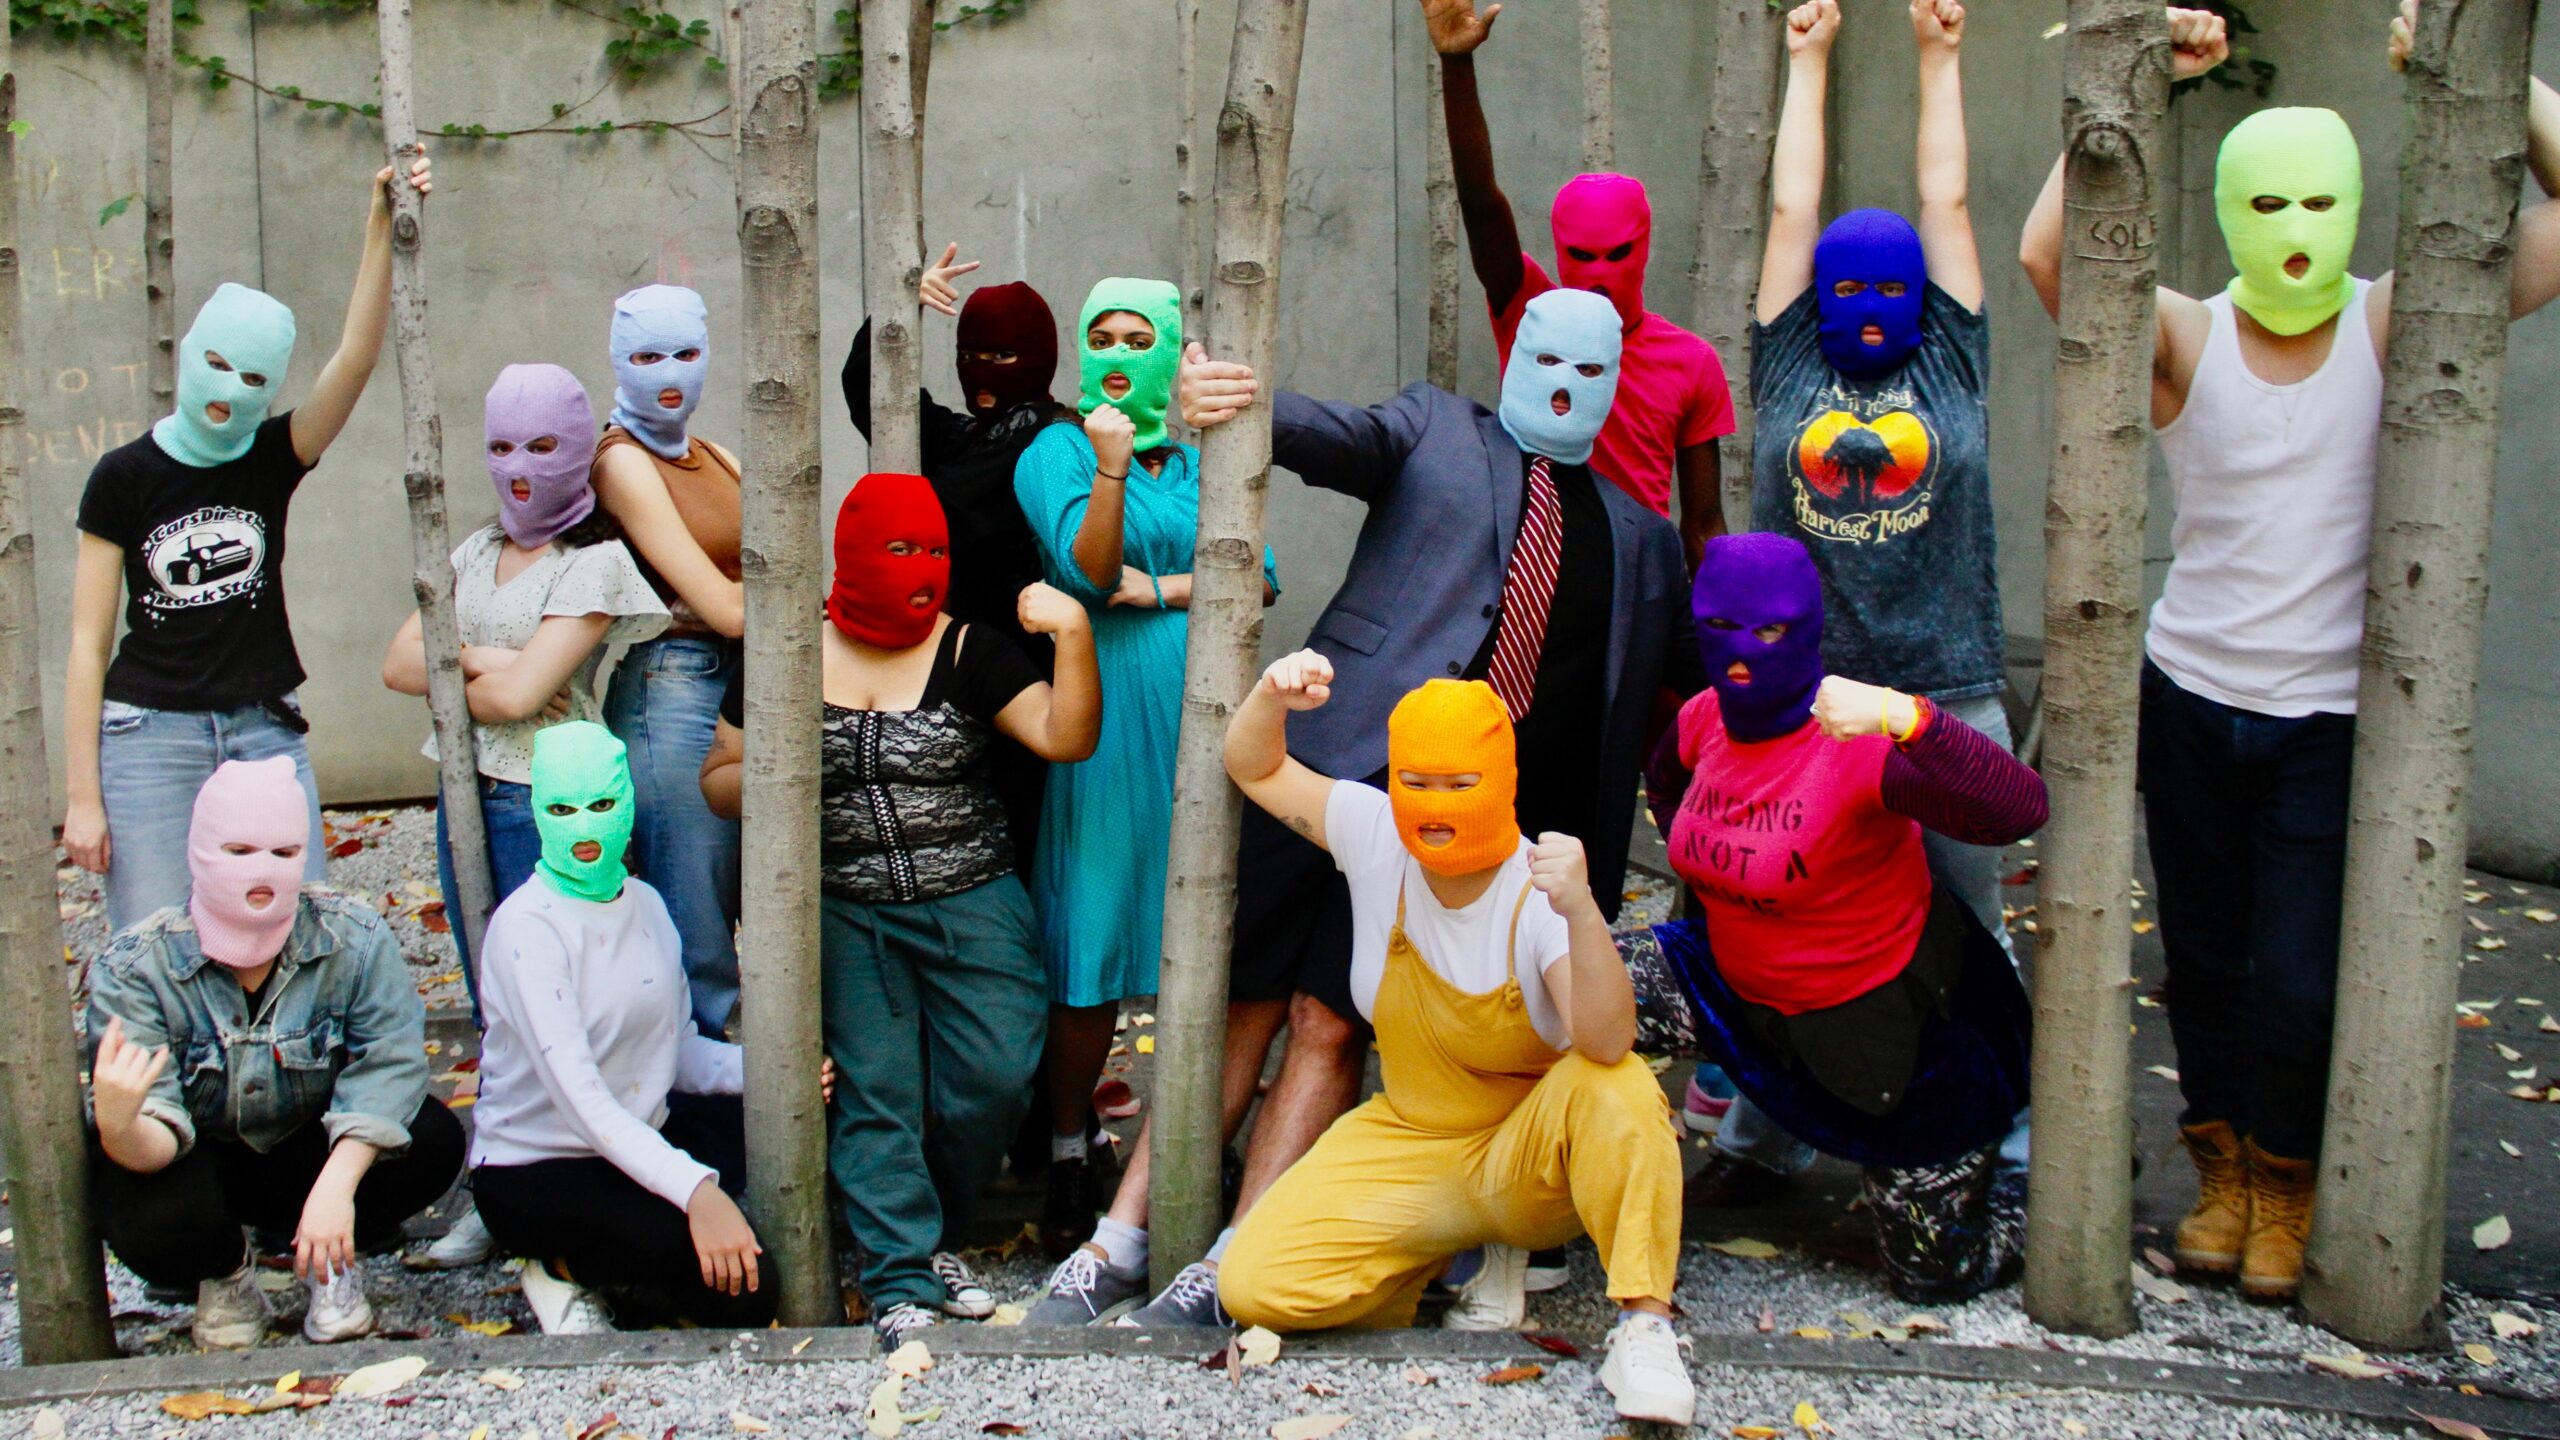 The New School cast of the play “We Are Pussy Riot or Everything is P.R.” pose, while wearing a variety of neon colored ski masks.